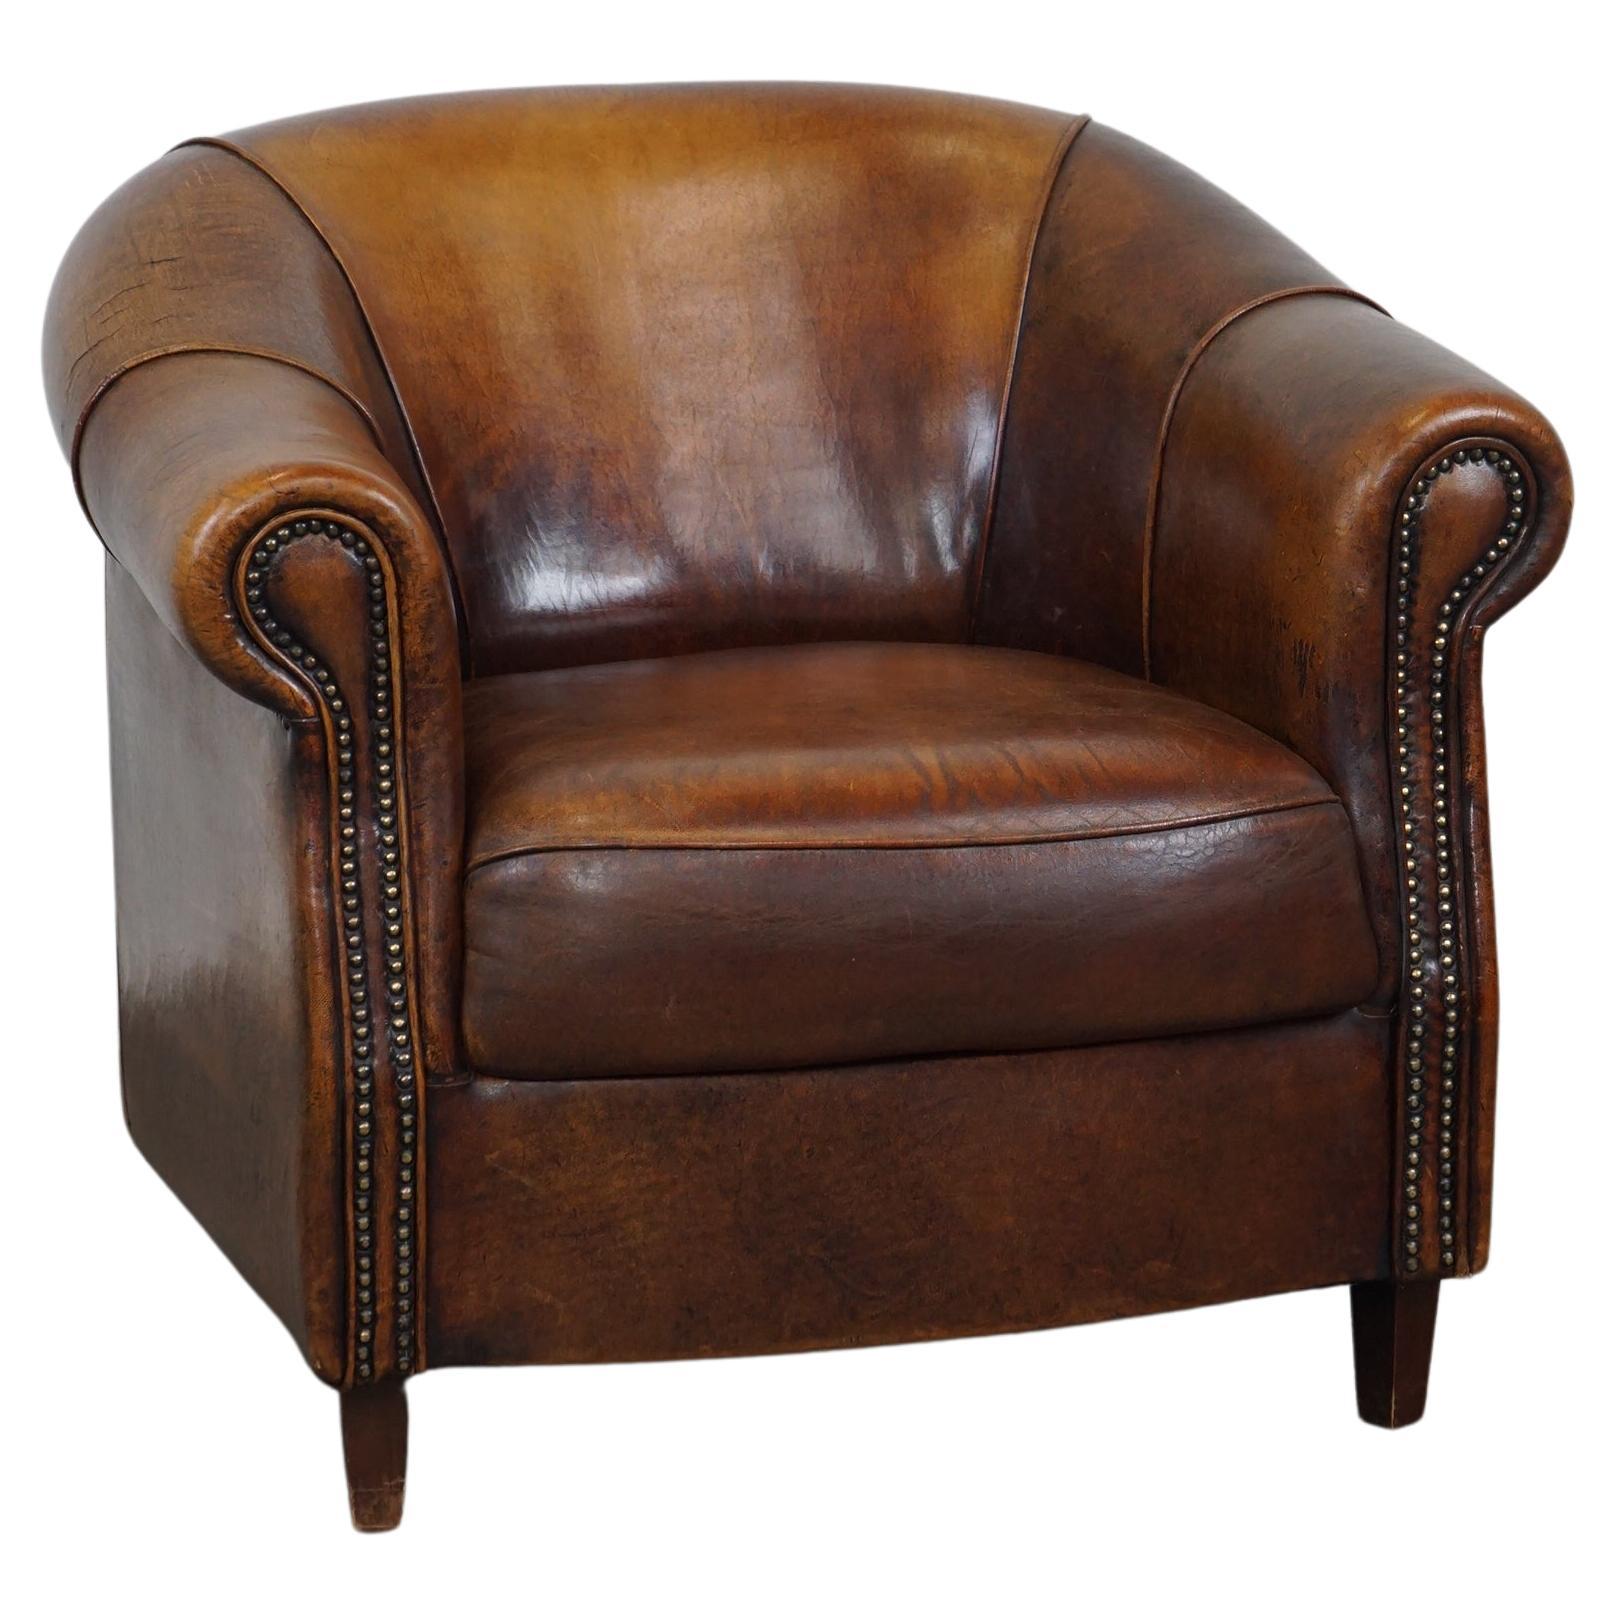 Sheepskin leather club armchair with beautiful colors and comfortable seating